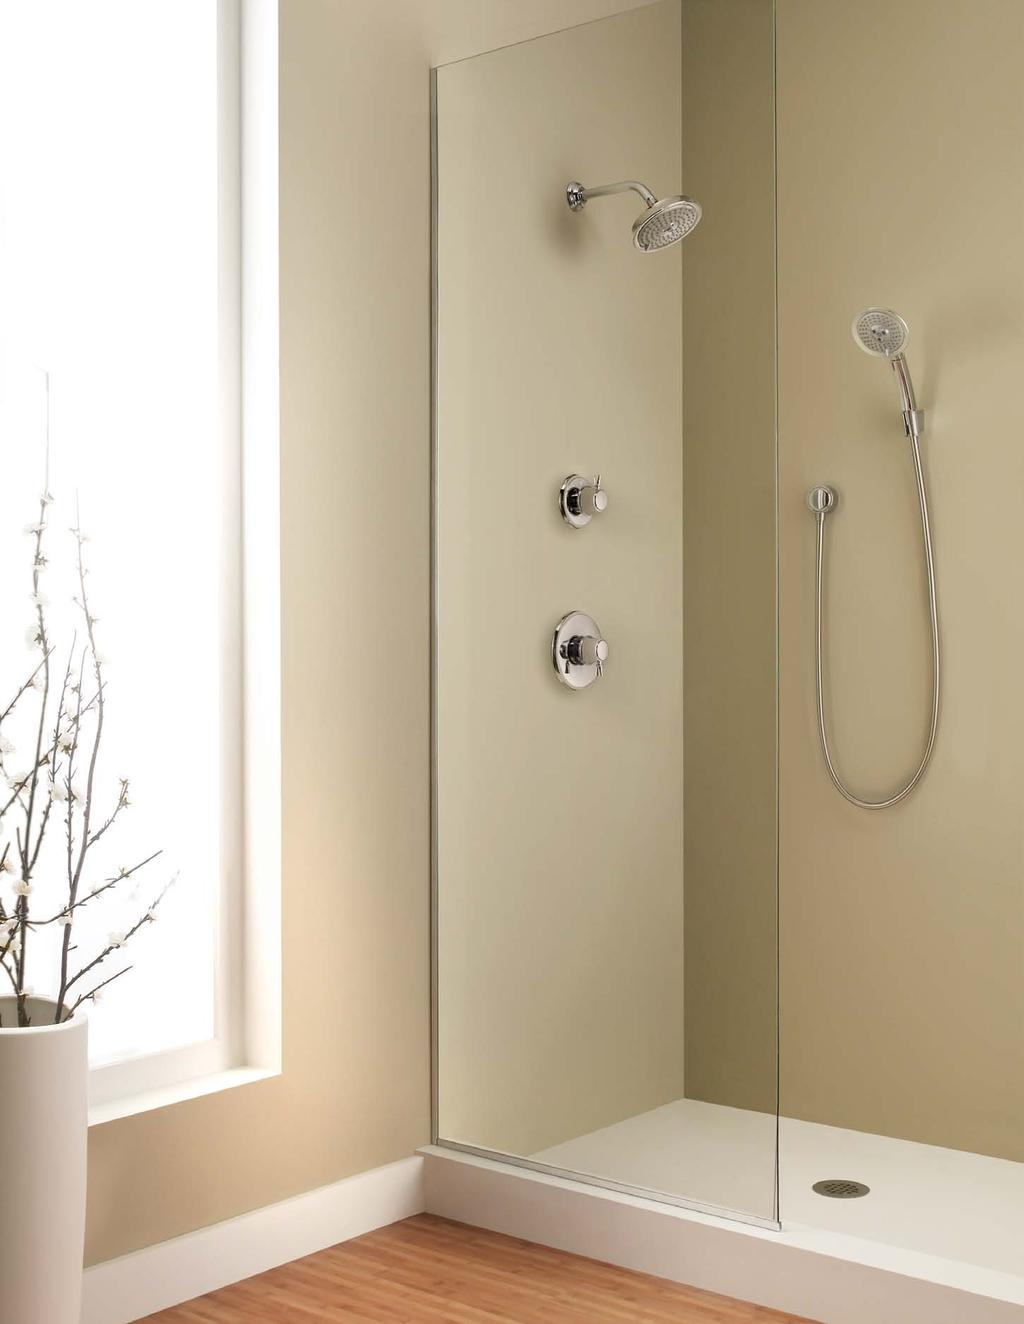 Transform a basic installation into a shower system by adding a Trio 2-way diverter to your pressure balance trim.